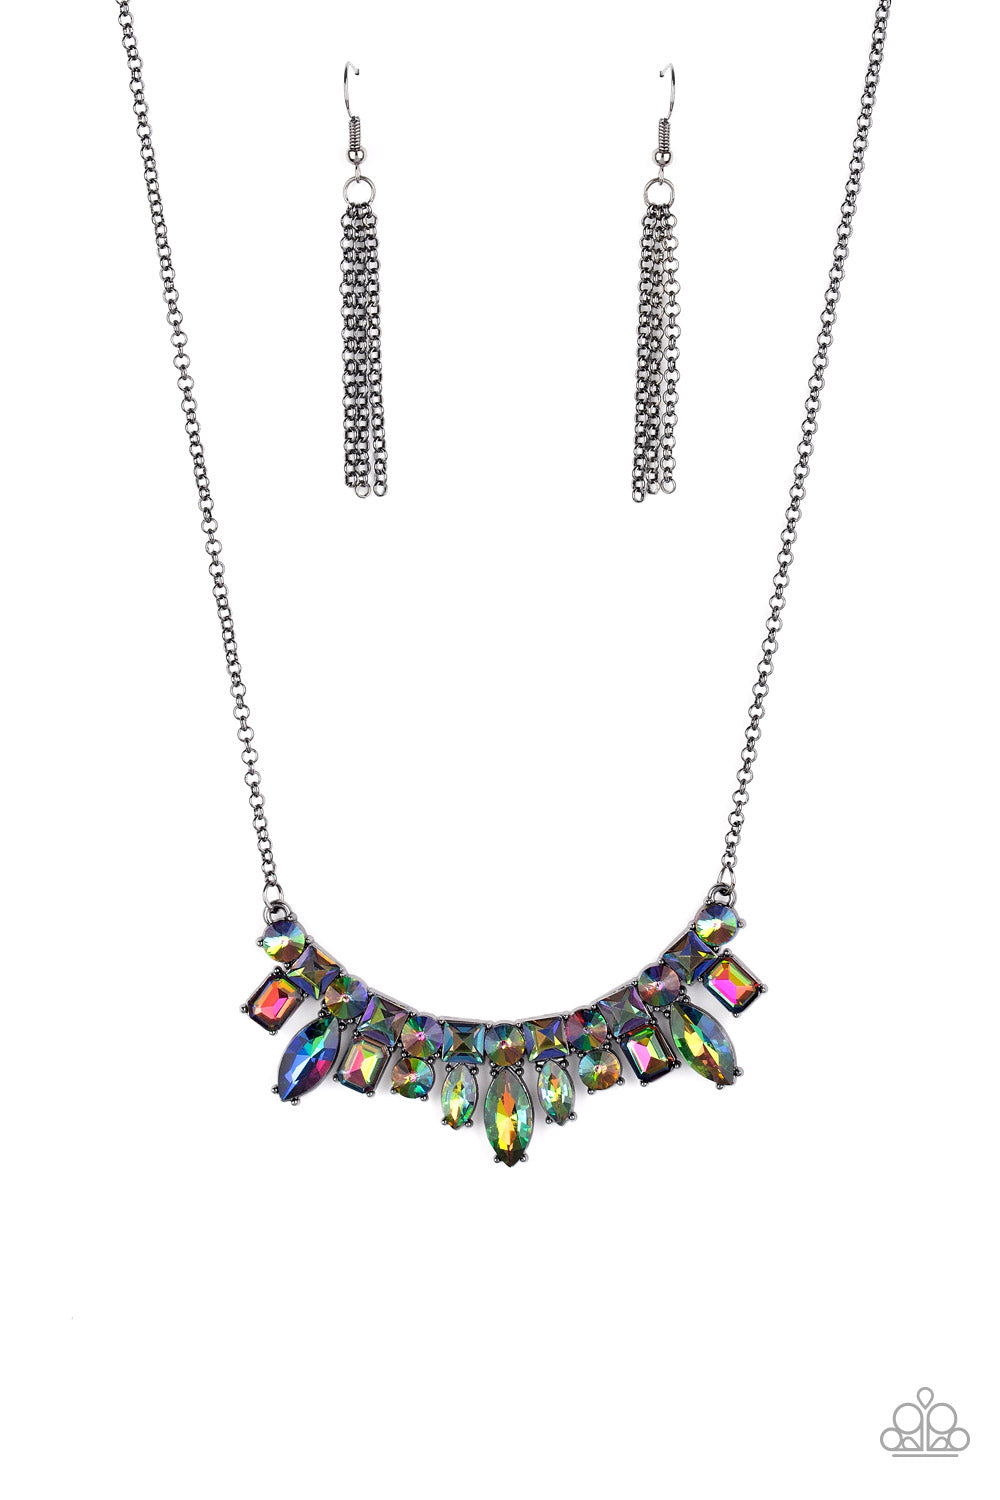 Paparazzi Wish Upon a ROCK STAR Multi Short Necklace